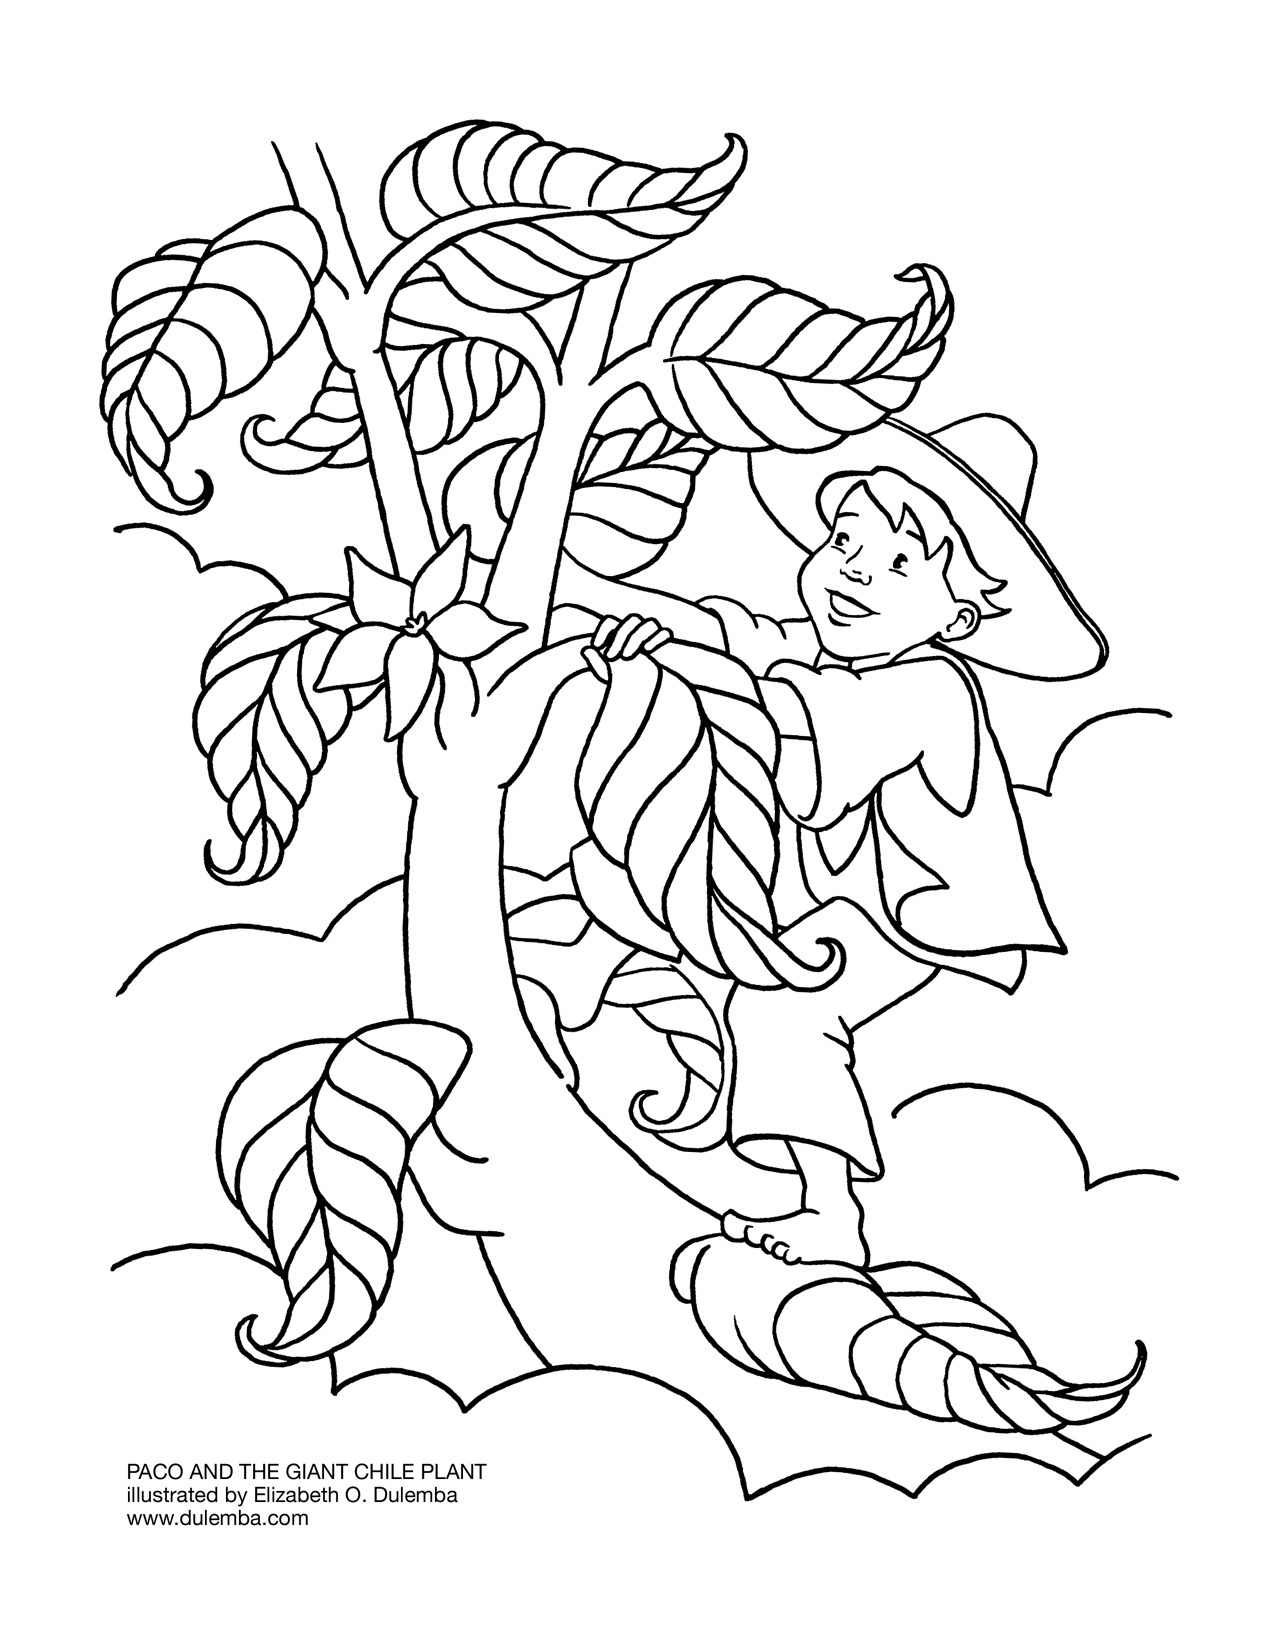 free-jack-and-the-beanstalk-coloring-pages-download-free-jack-and-the-beanstalk-coloring-pages